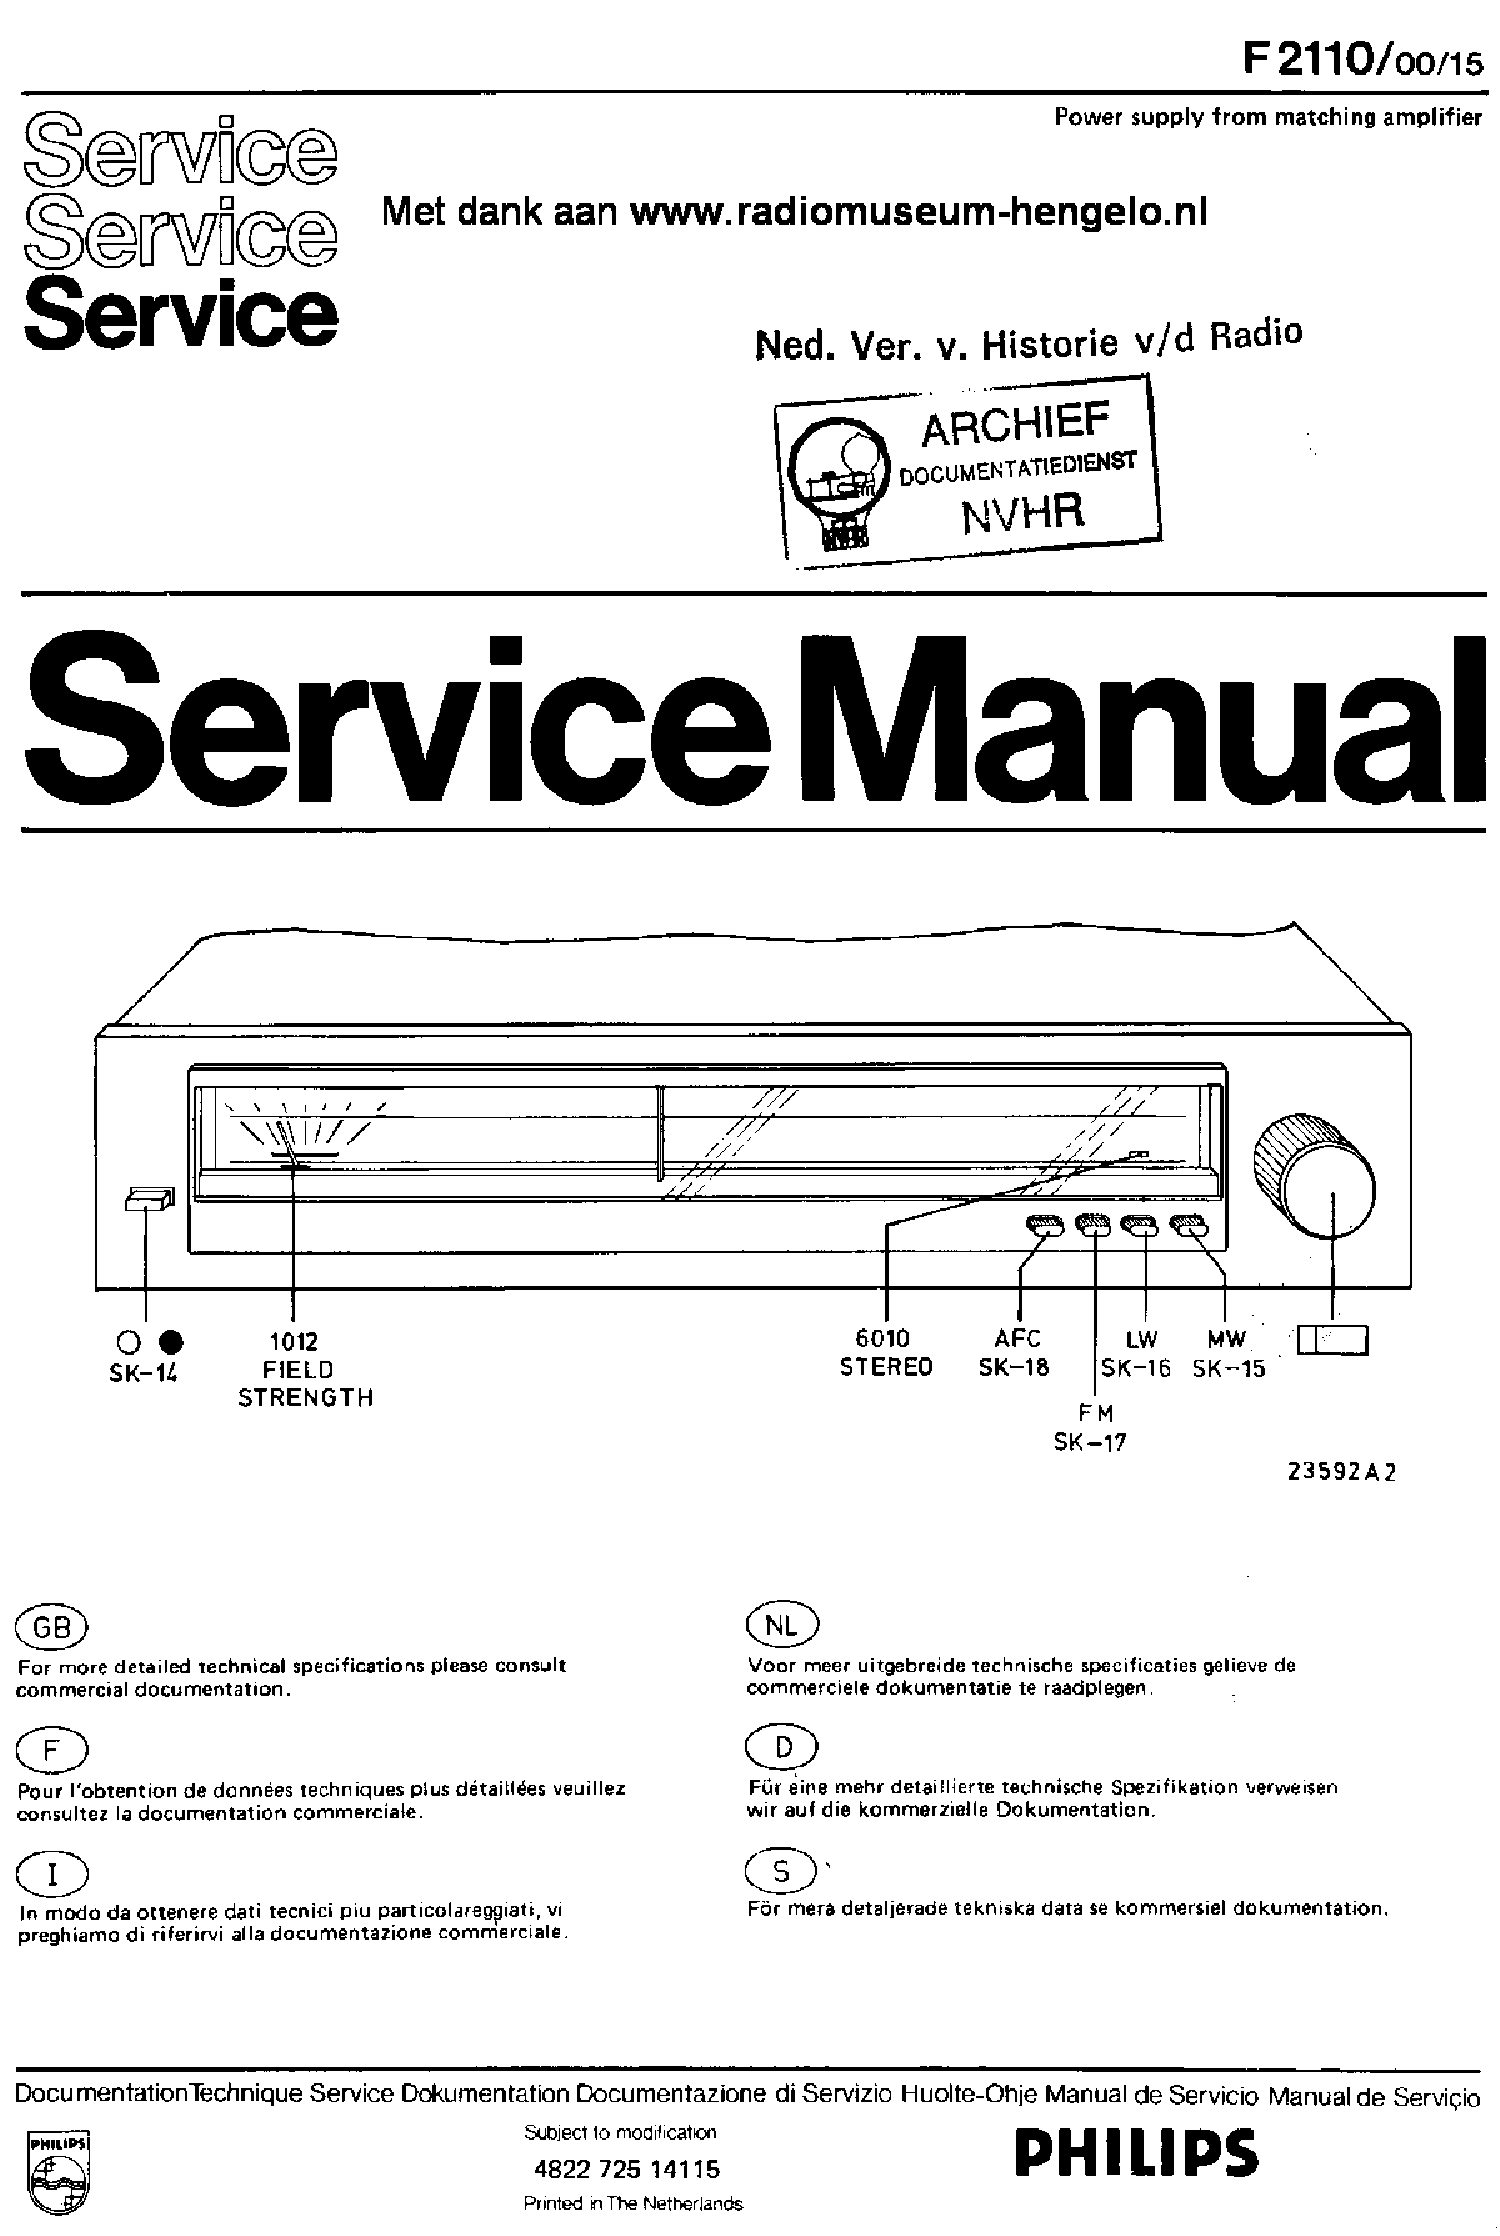 PHILIPS F2110-00-15 AM FM TUNER SM service manual (1st page)